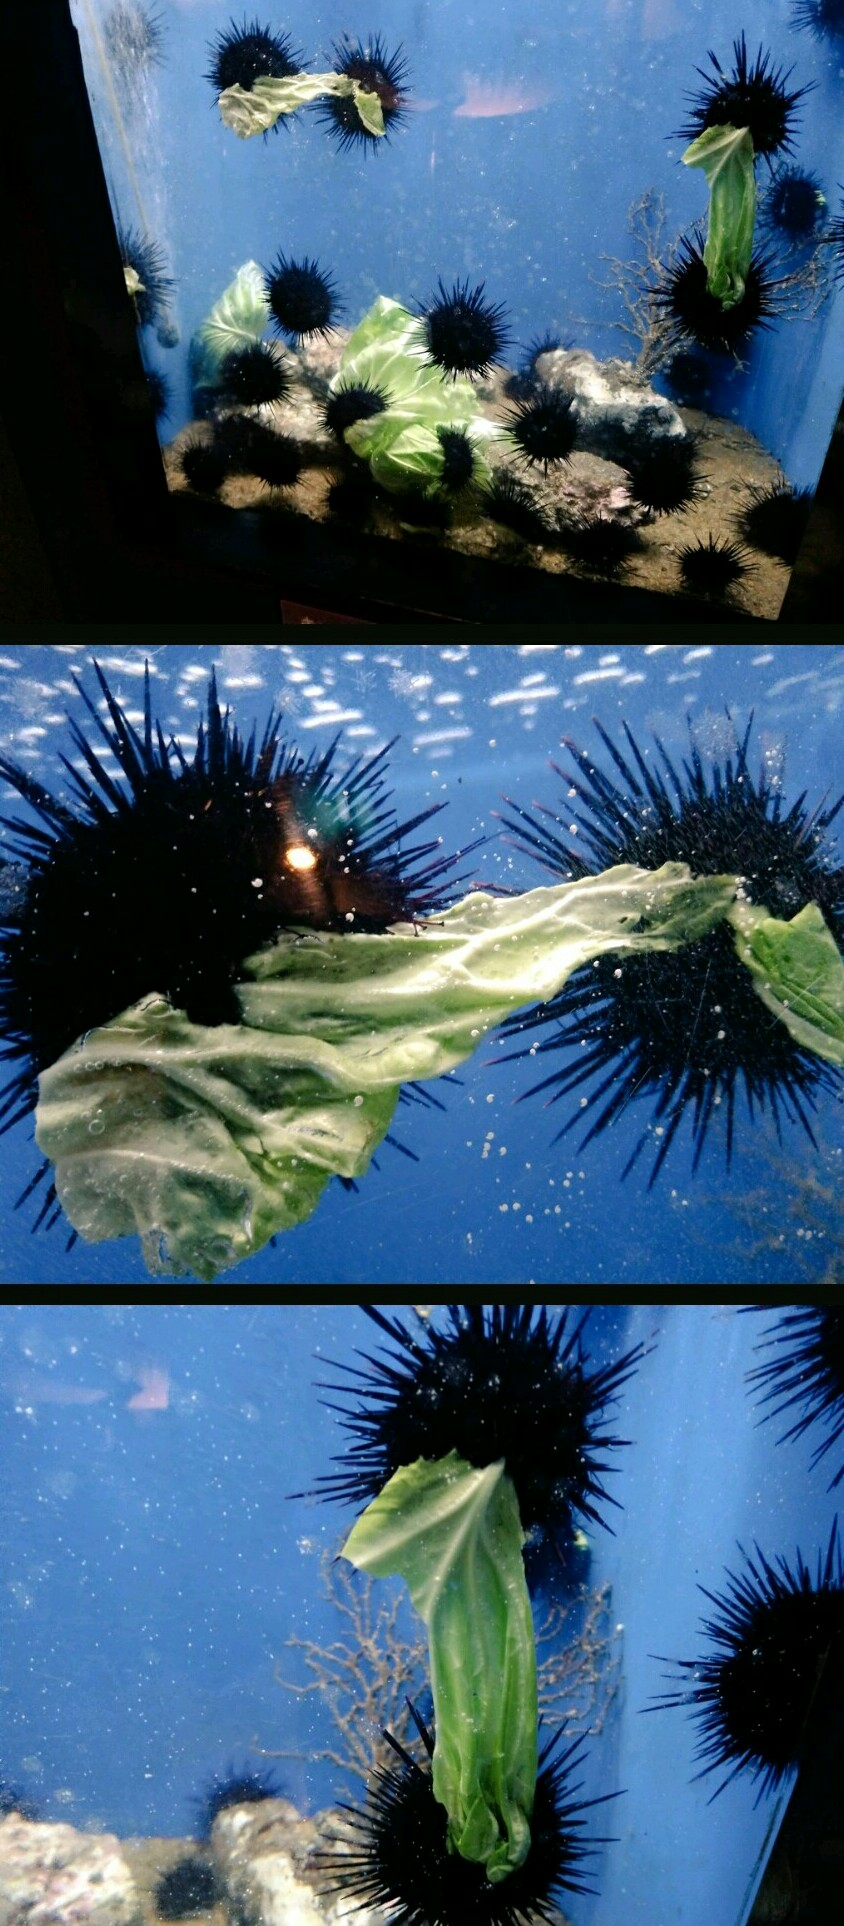 Sea urchins fight over cabbage leaves.